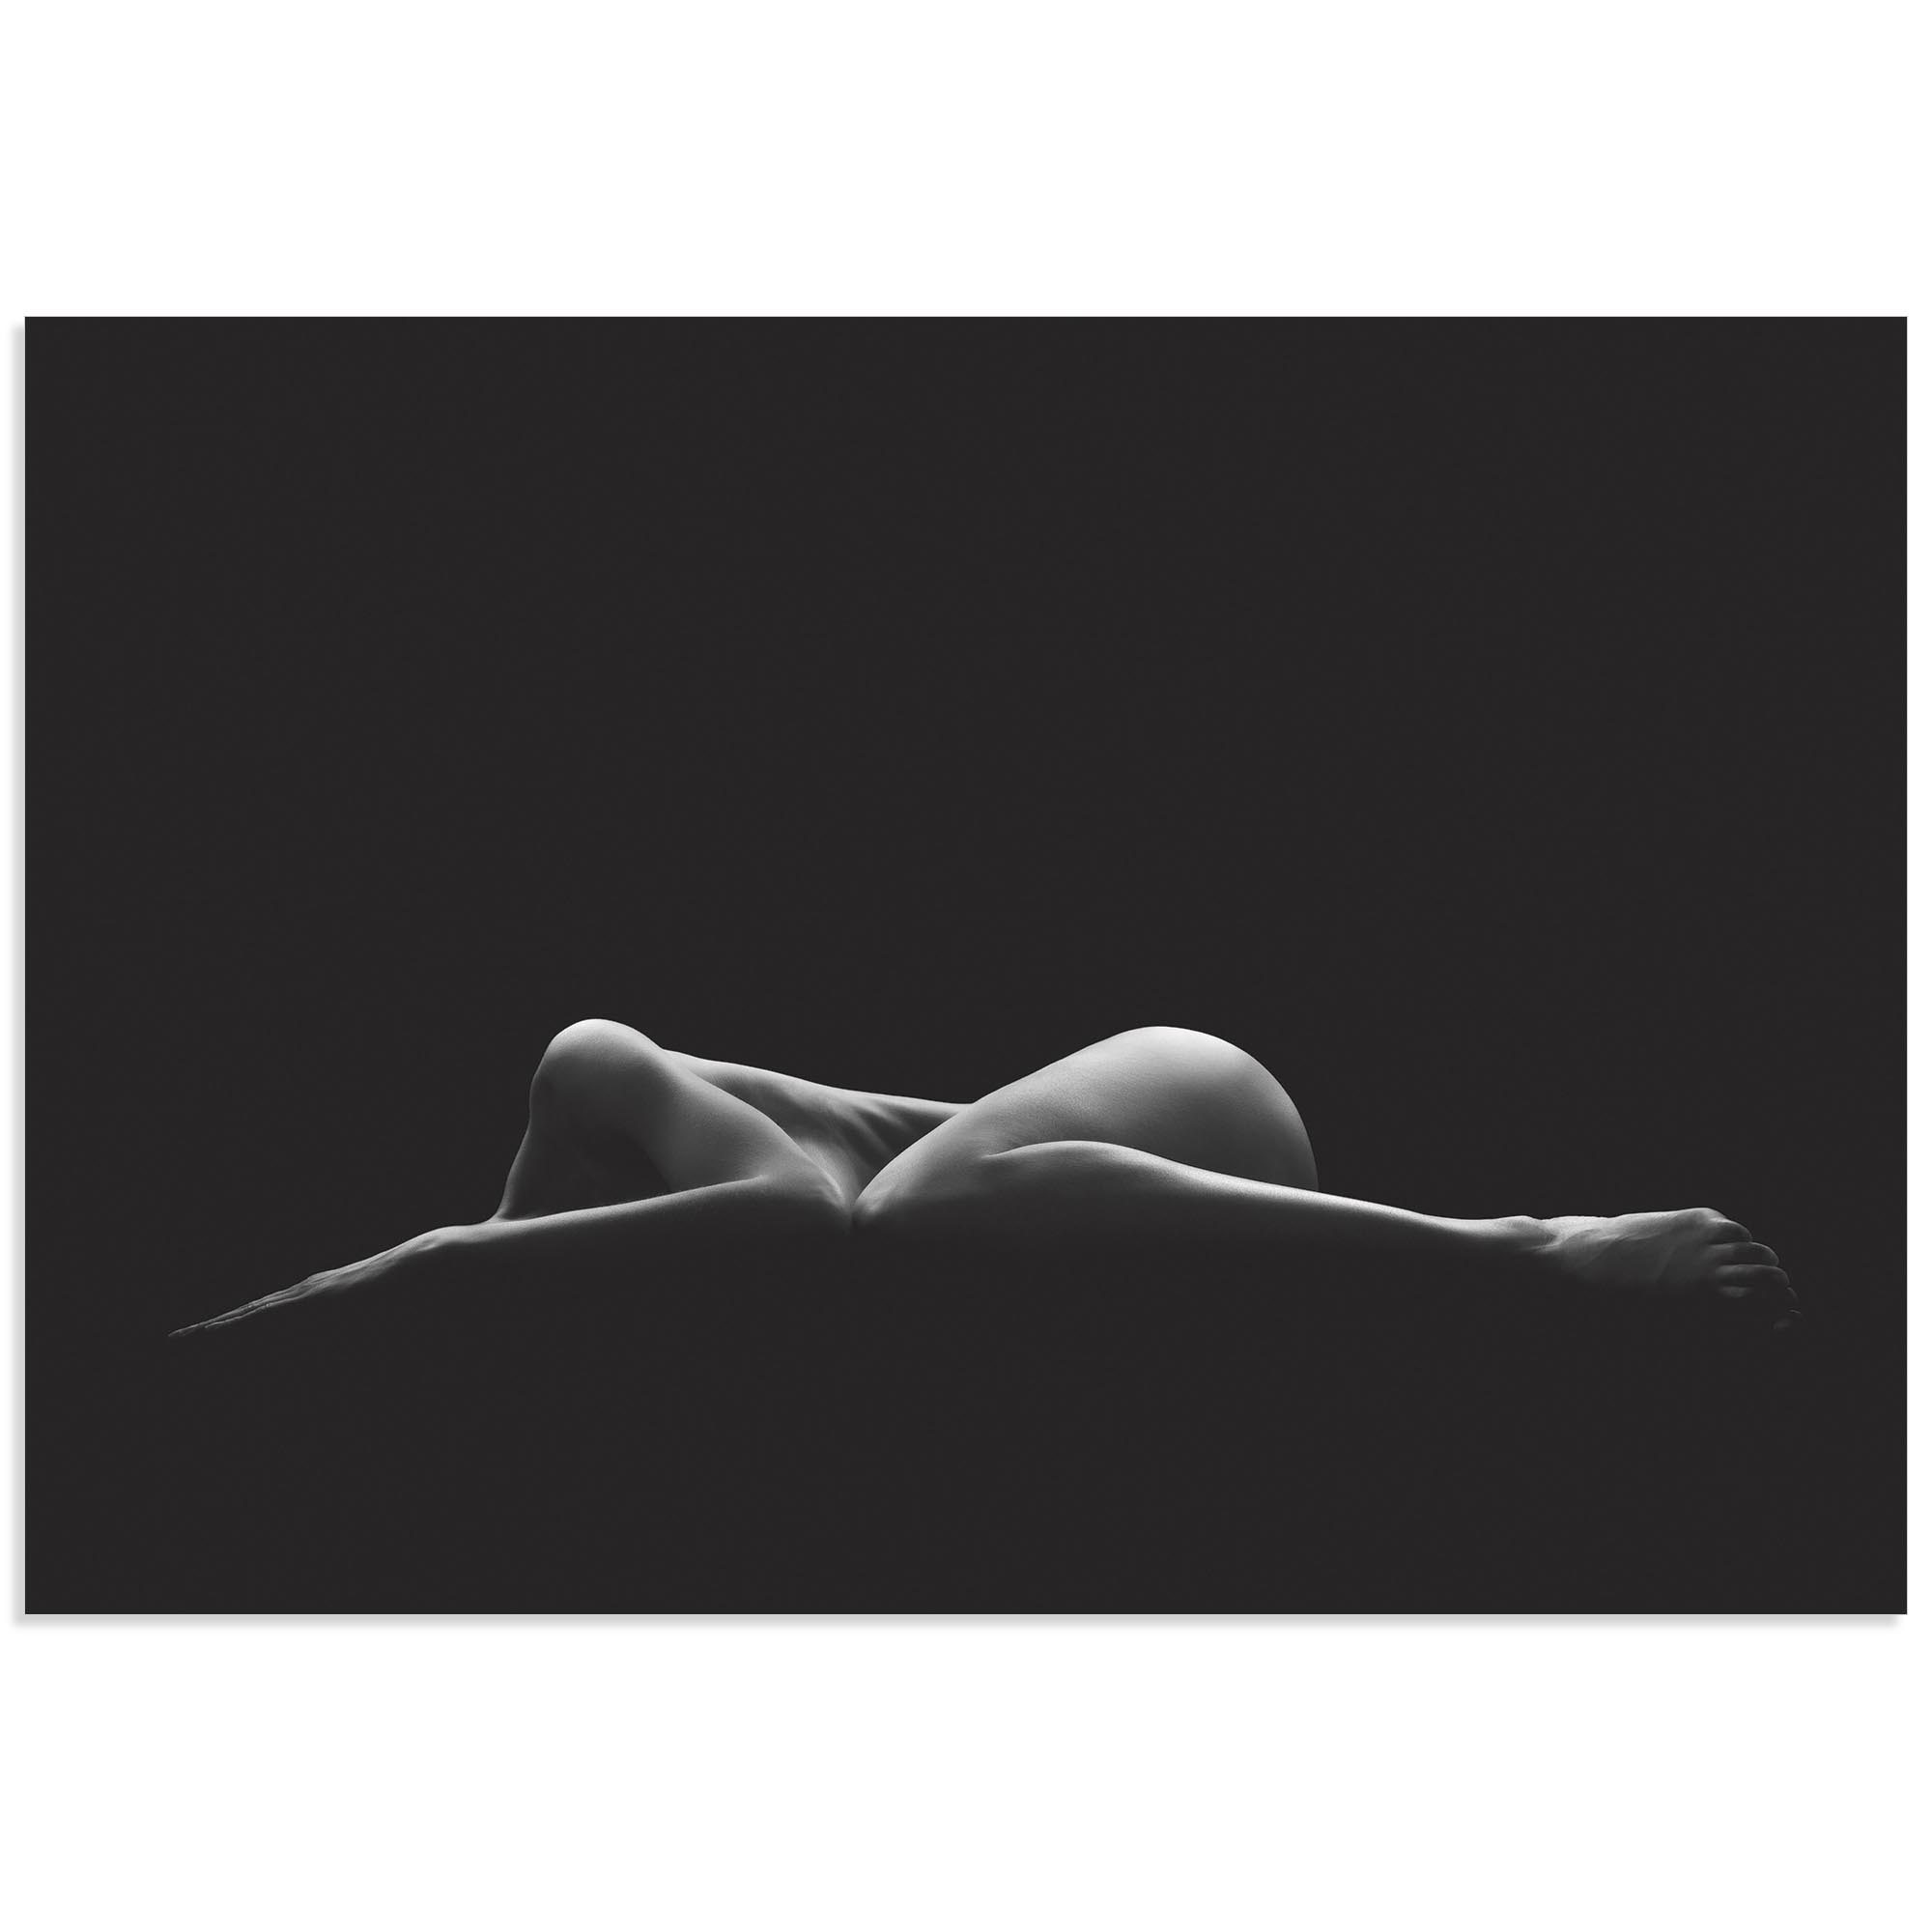 Bodyscape by Leon Schr??_??__??_??___??_??__??_??____??_??__??_??___??_??__??_??_____??_??__??_??___??_??__??_??____??_??__??_??___??_??__??_??______der - Human Form Photography on Metal or Acrylic